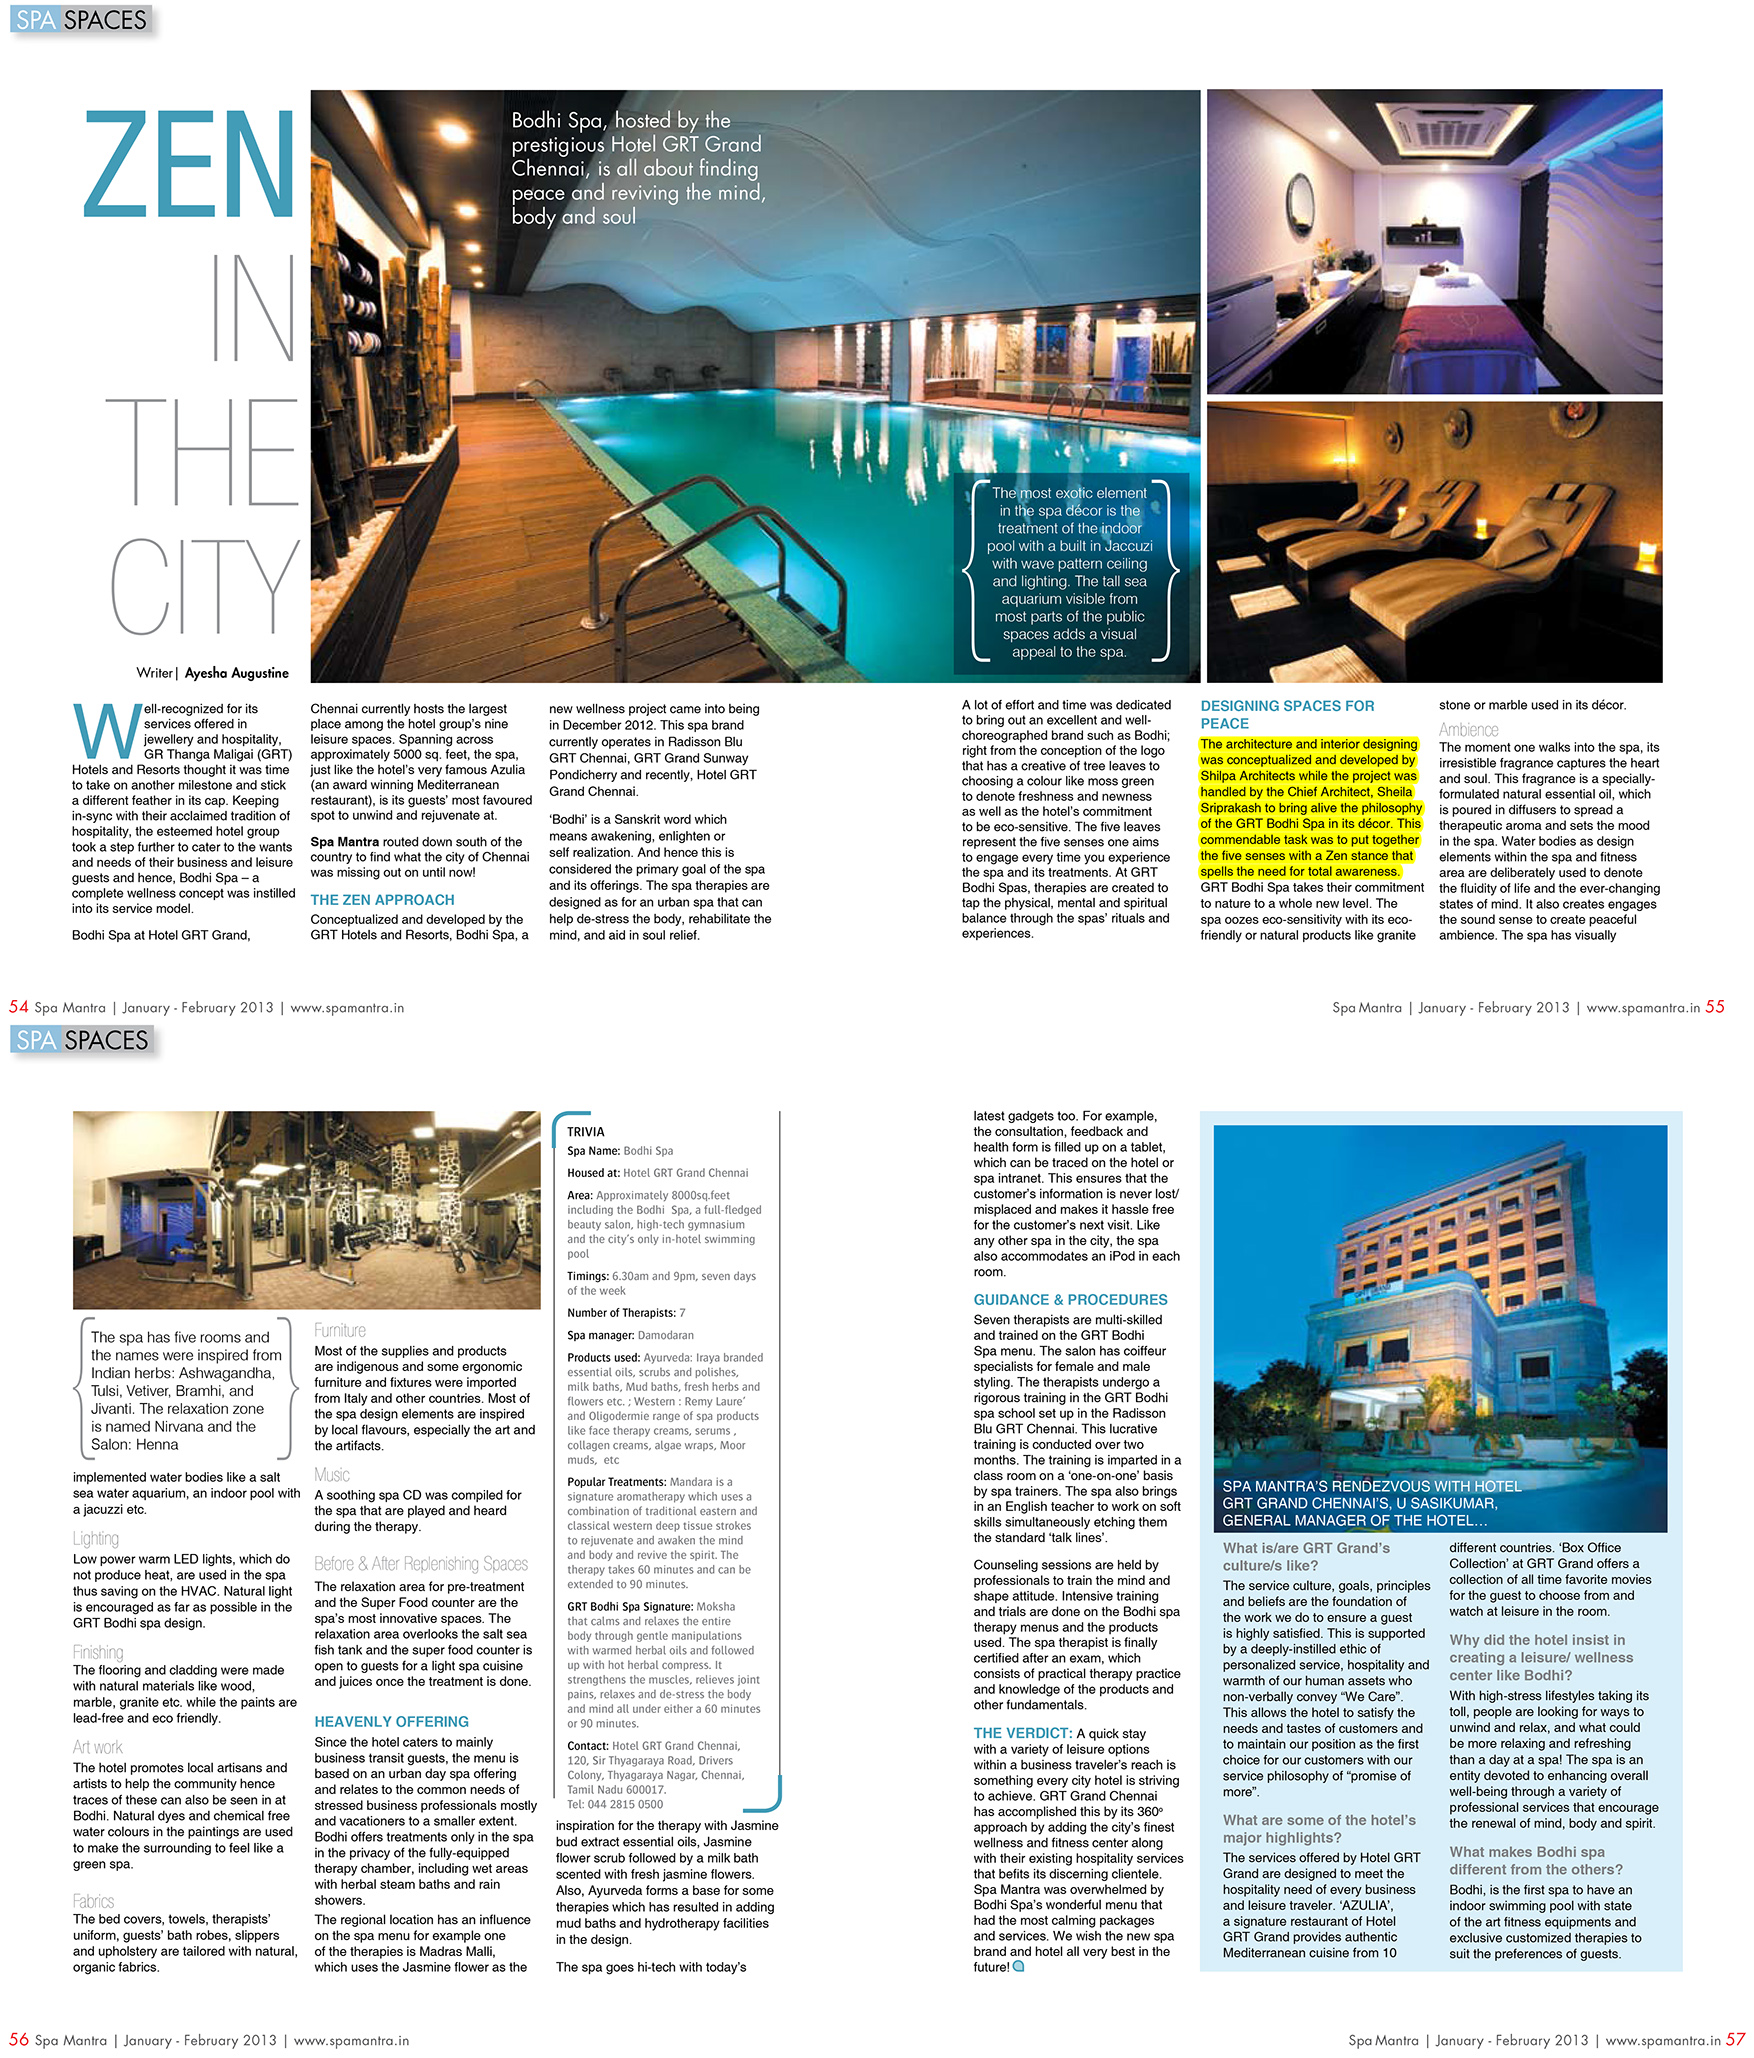 Spa Mantra, Jan/Feb 2013 - Zen in the City - GRT Bodhi Spa designed by Shilpa Architects